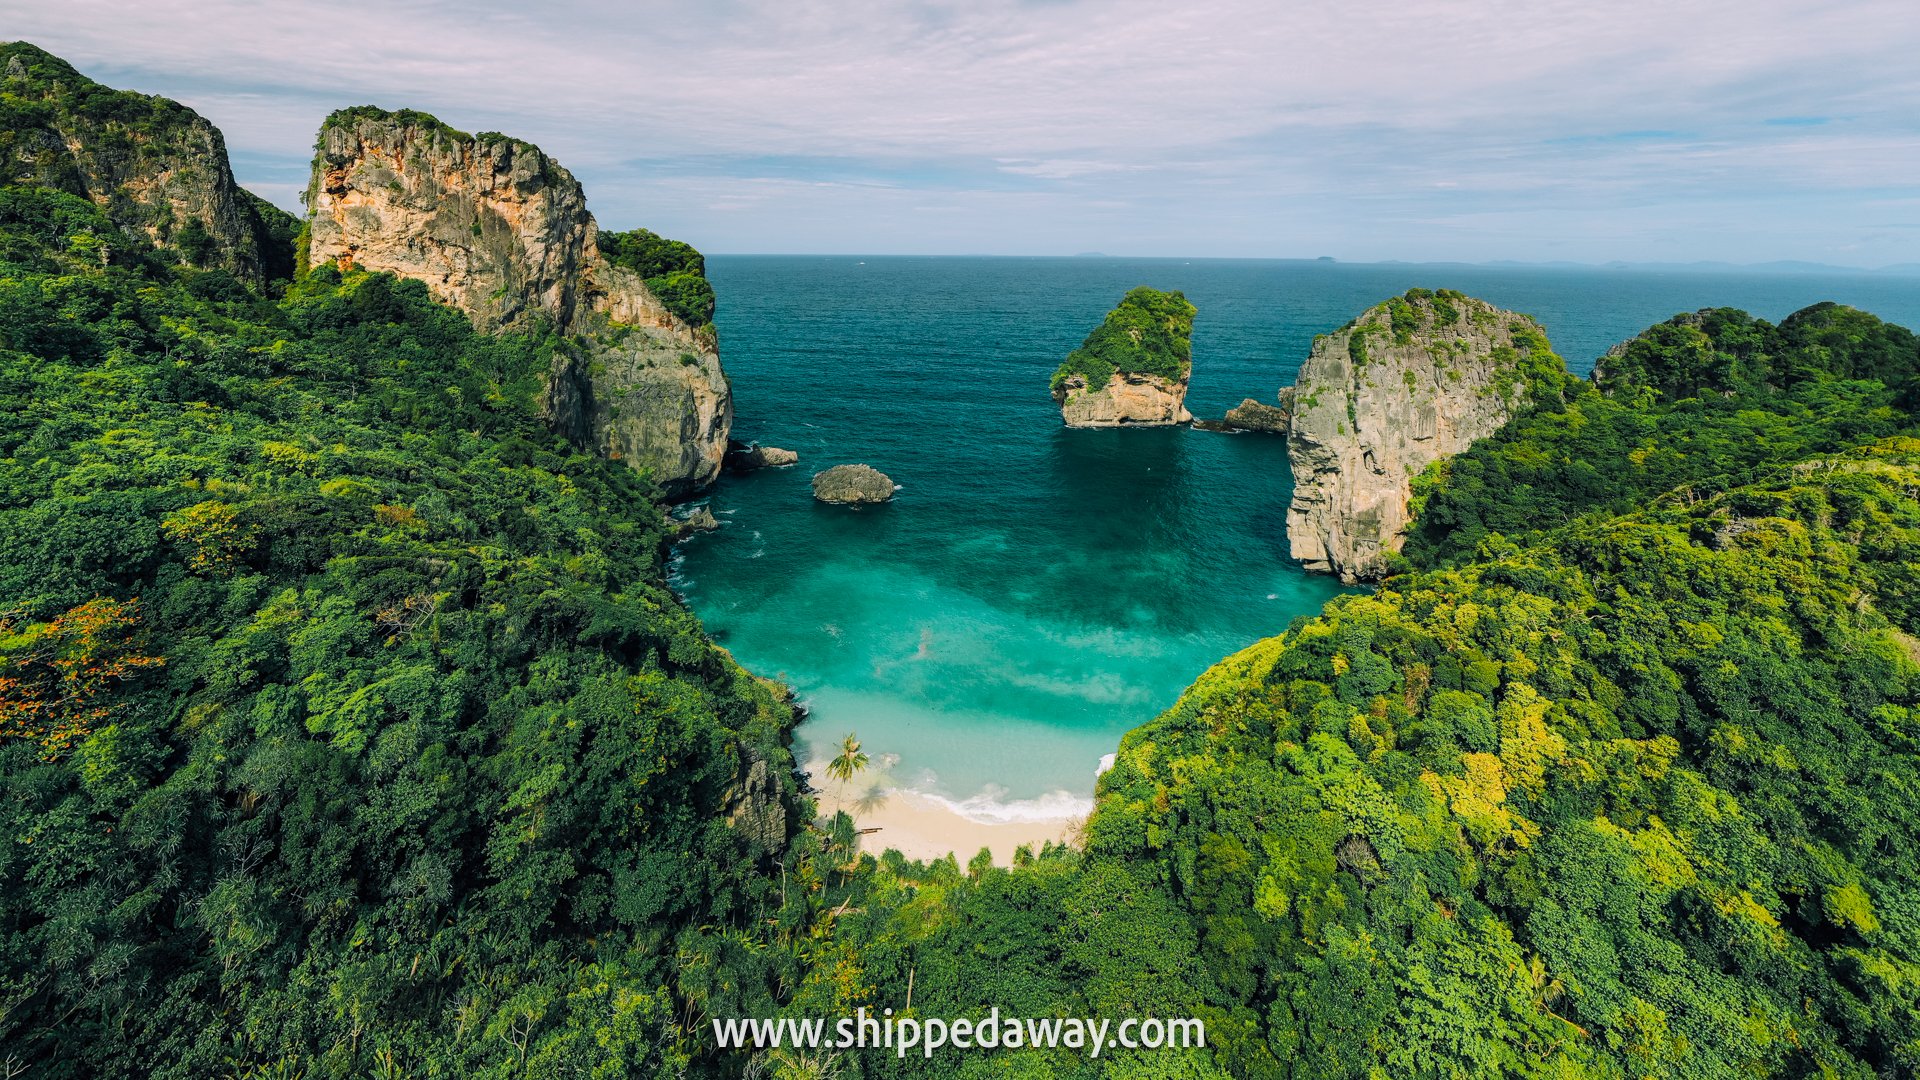 Nui Beach, the most picturesque beach in a stunning location of Phi Phi Islands